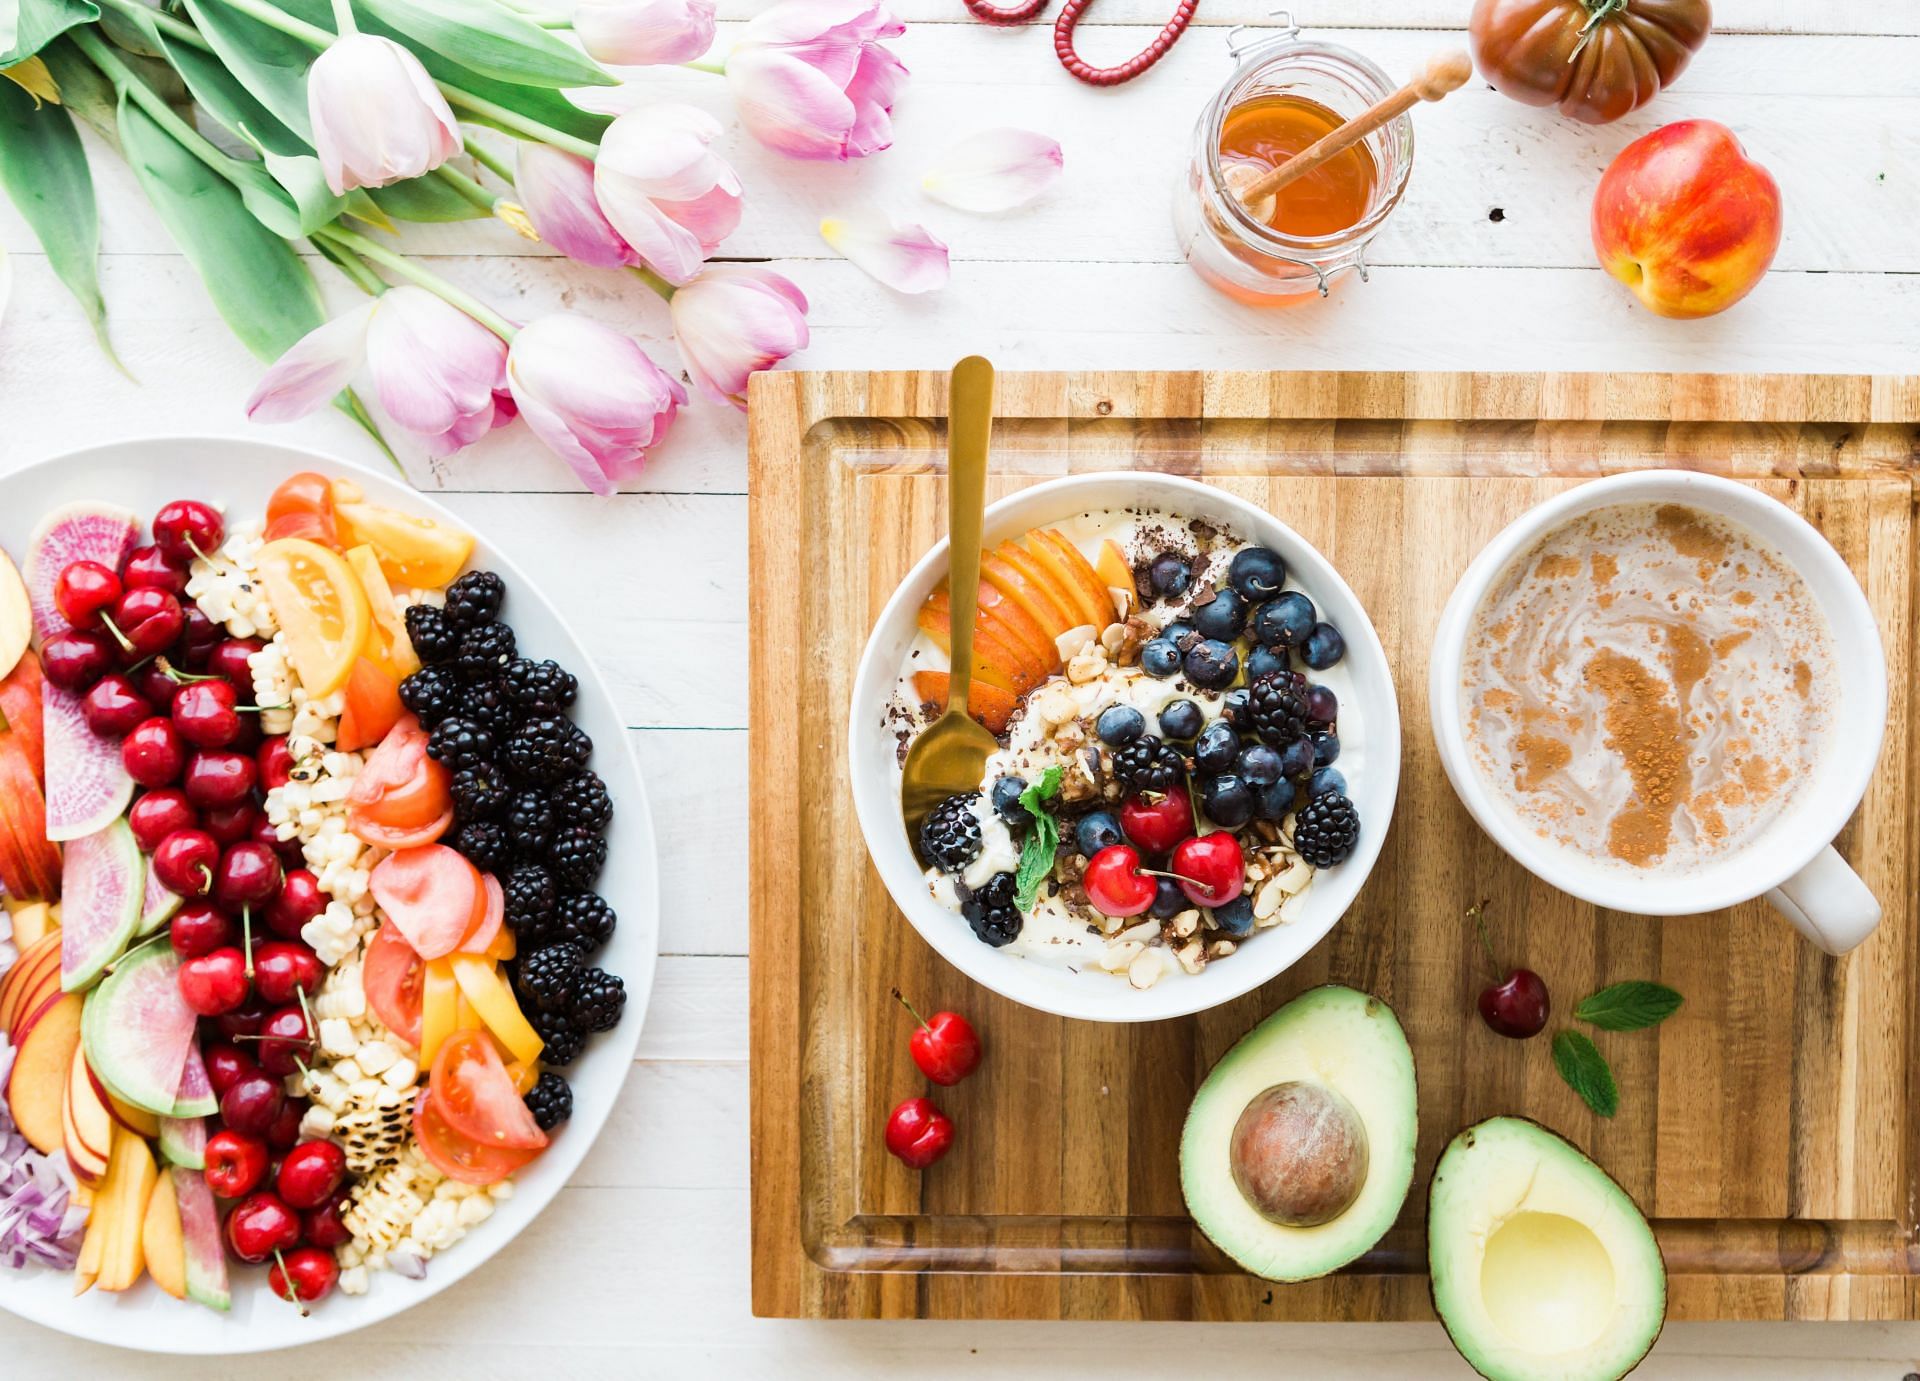 Diet for ulcers include fibers along with different fruits. (Image via Unsplash/ Brooke Lark)